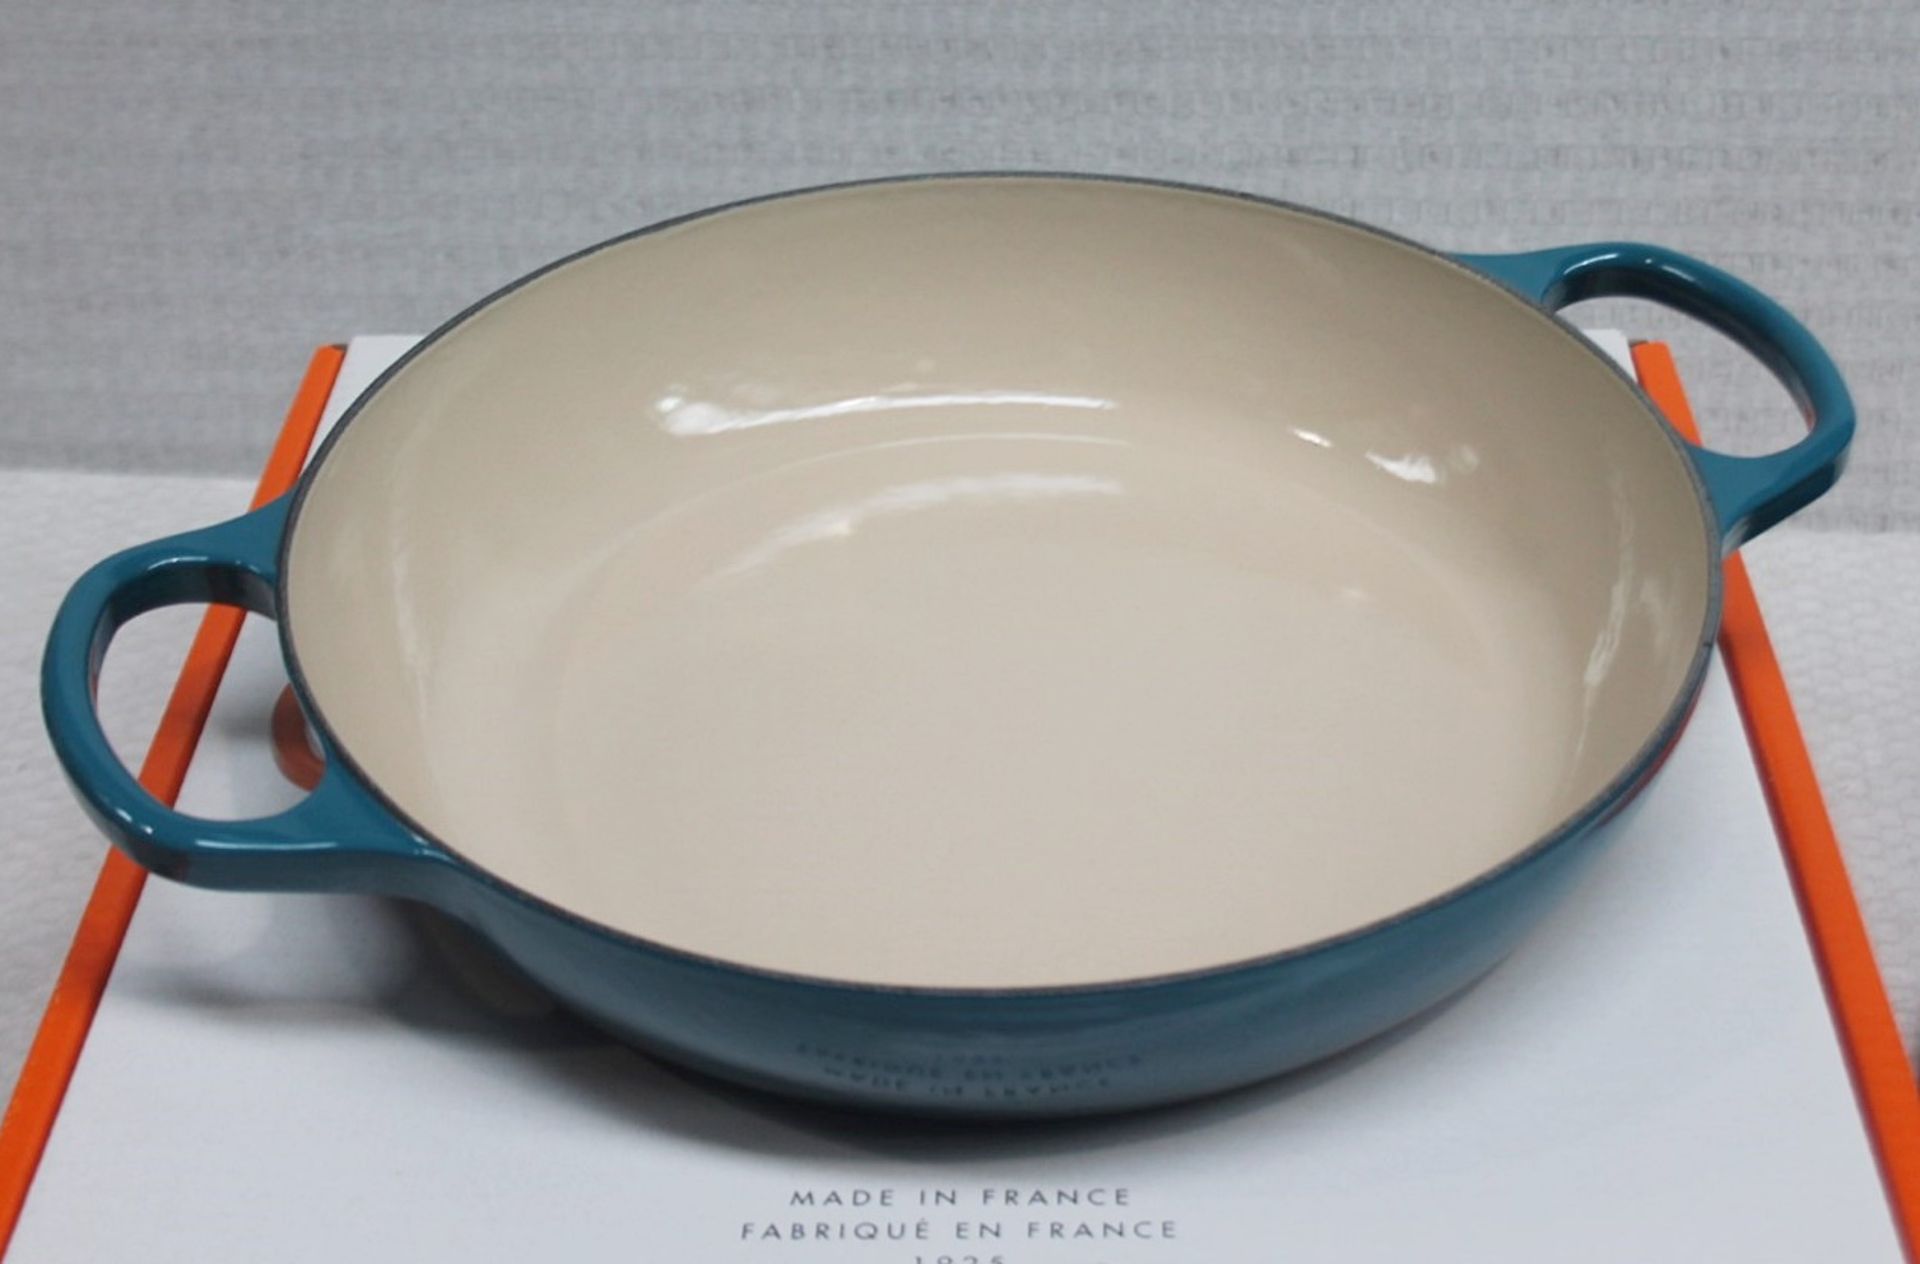 1 x LE CREUSET 'Signature' Enamelled Cast Iron Shallow Casserole Dish In Teal - RRP £270.00 - Image 10 of 13